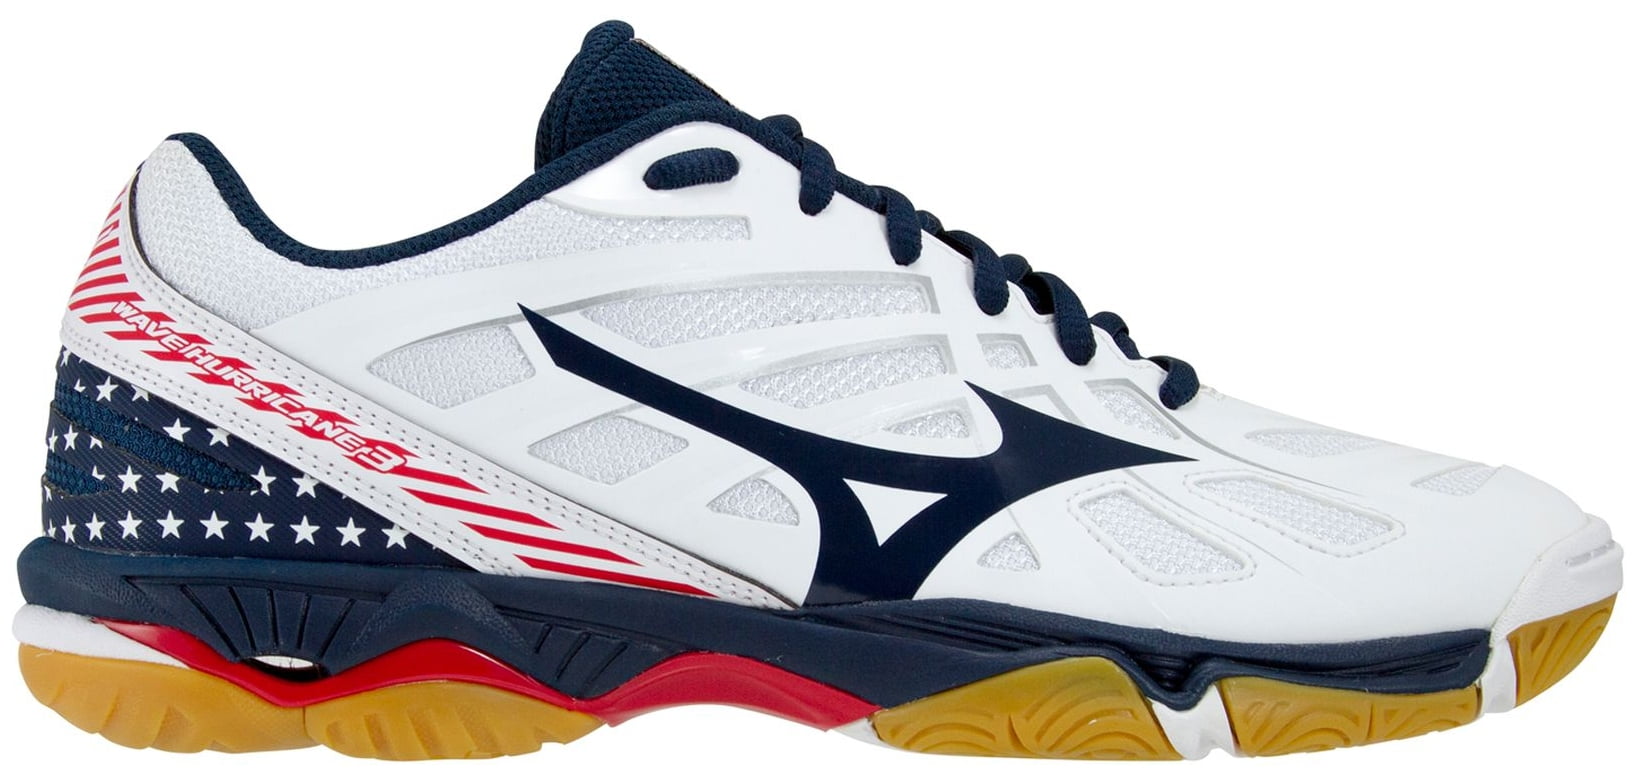 red mizuno volleyball shoes